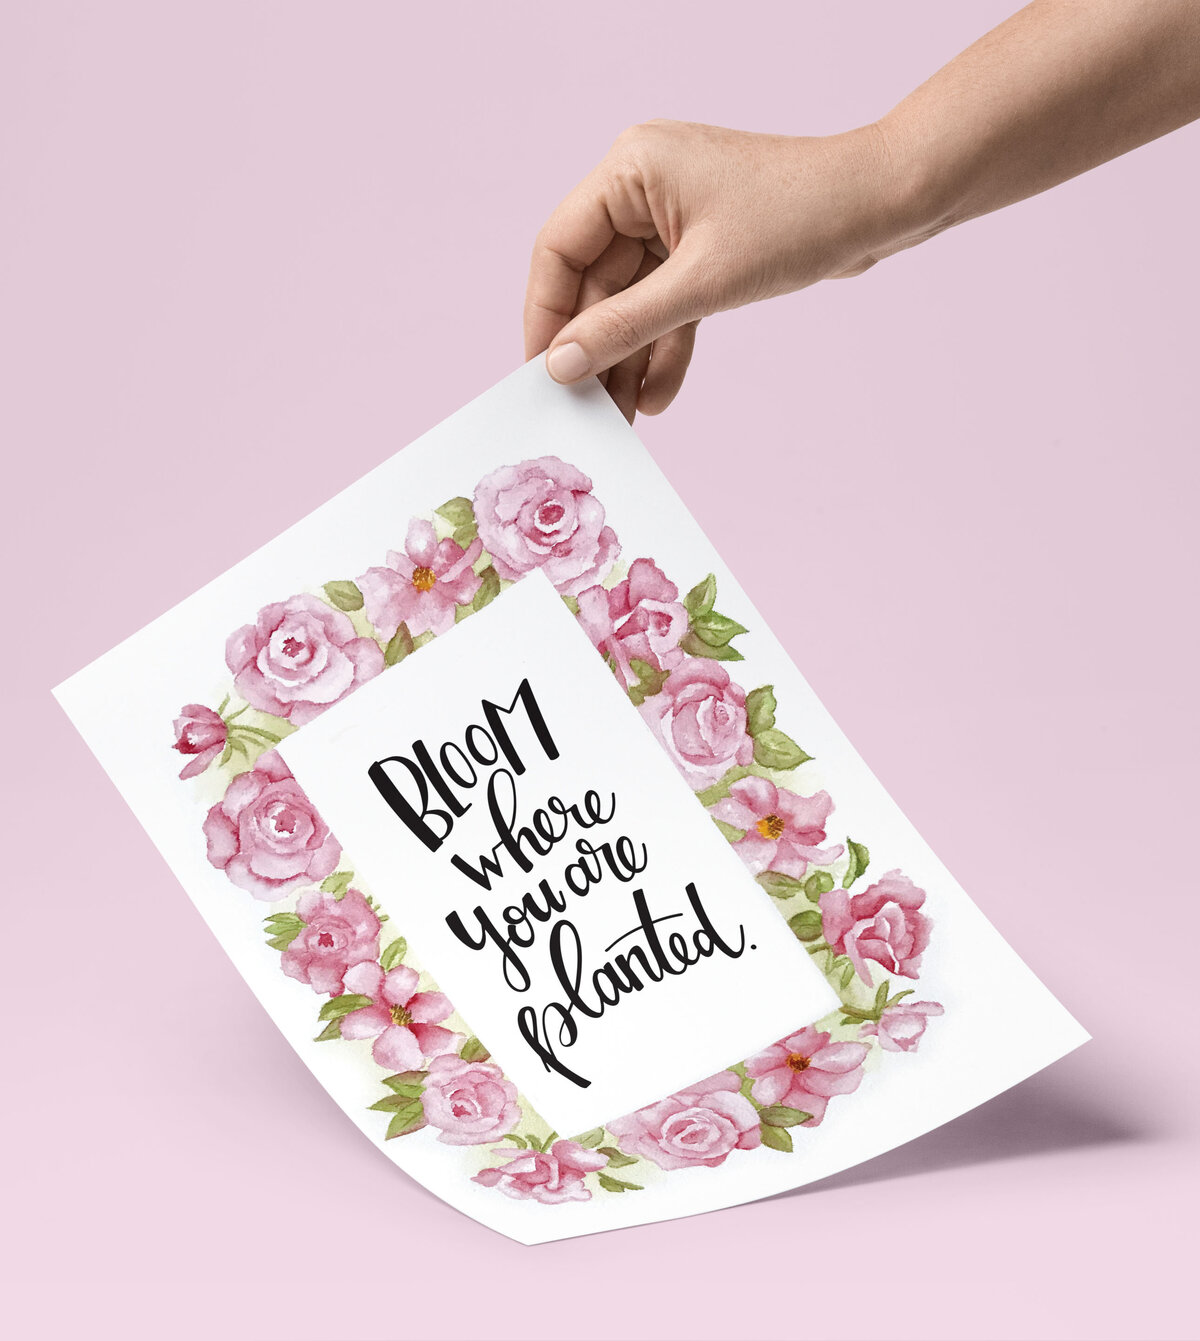 Bloom where you are planted lettering by Nancy Ingersoll